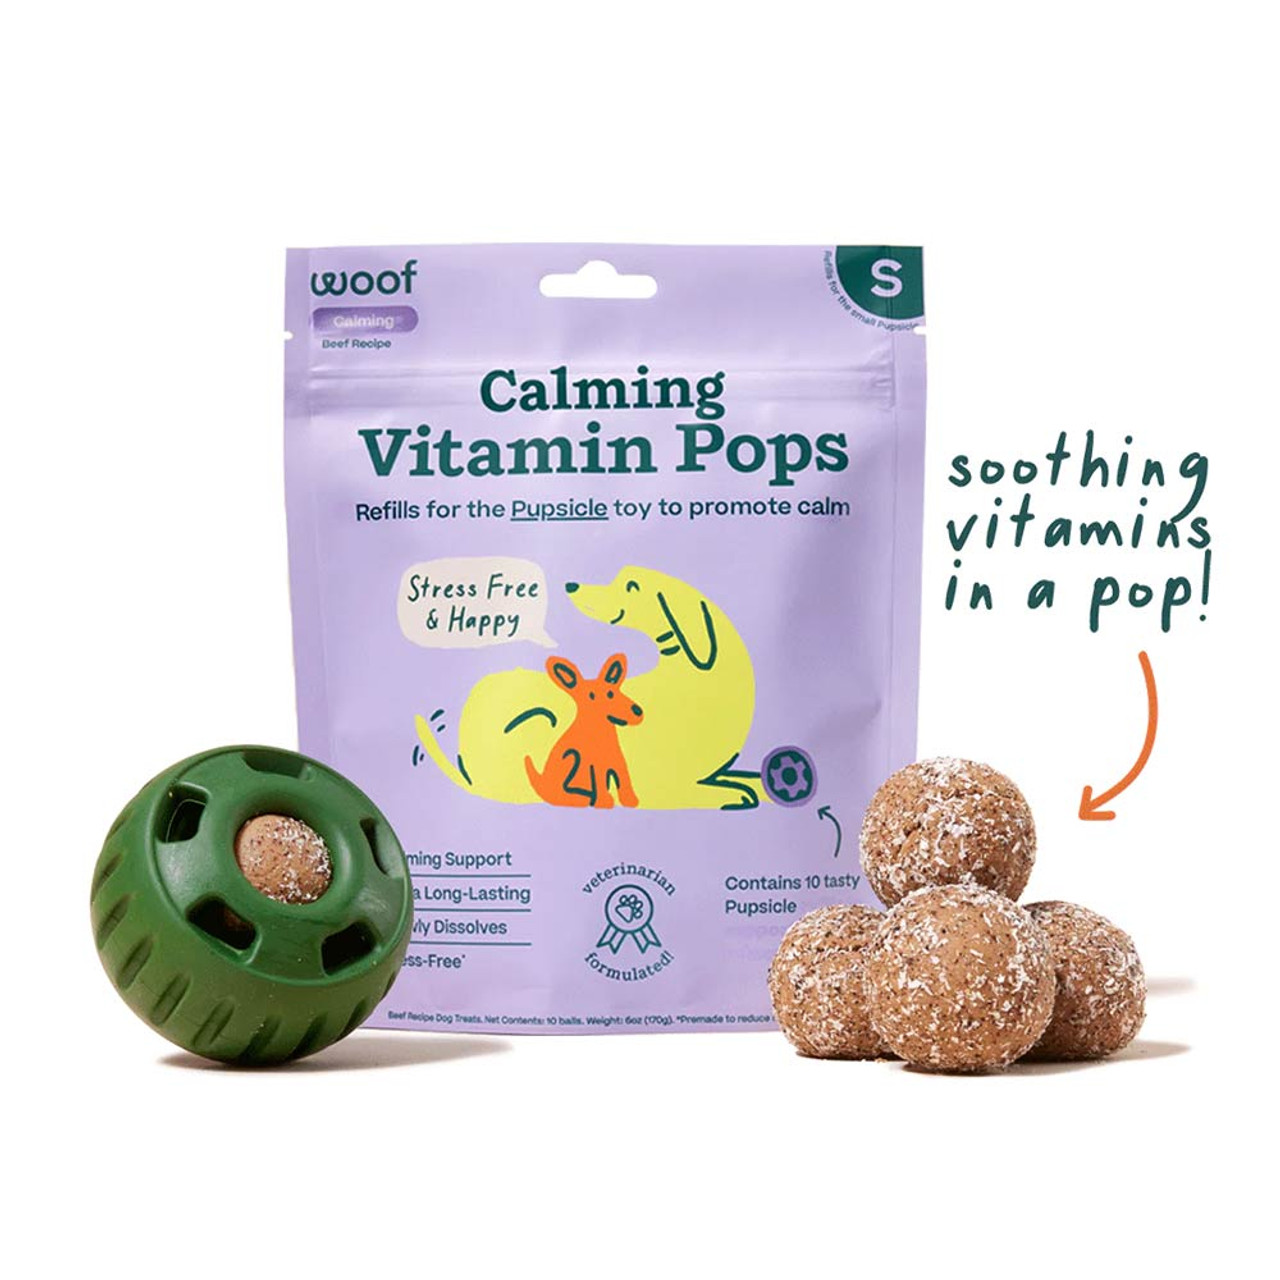 Woof Pupsicle Pops - Beef (Small)